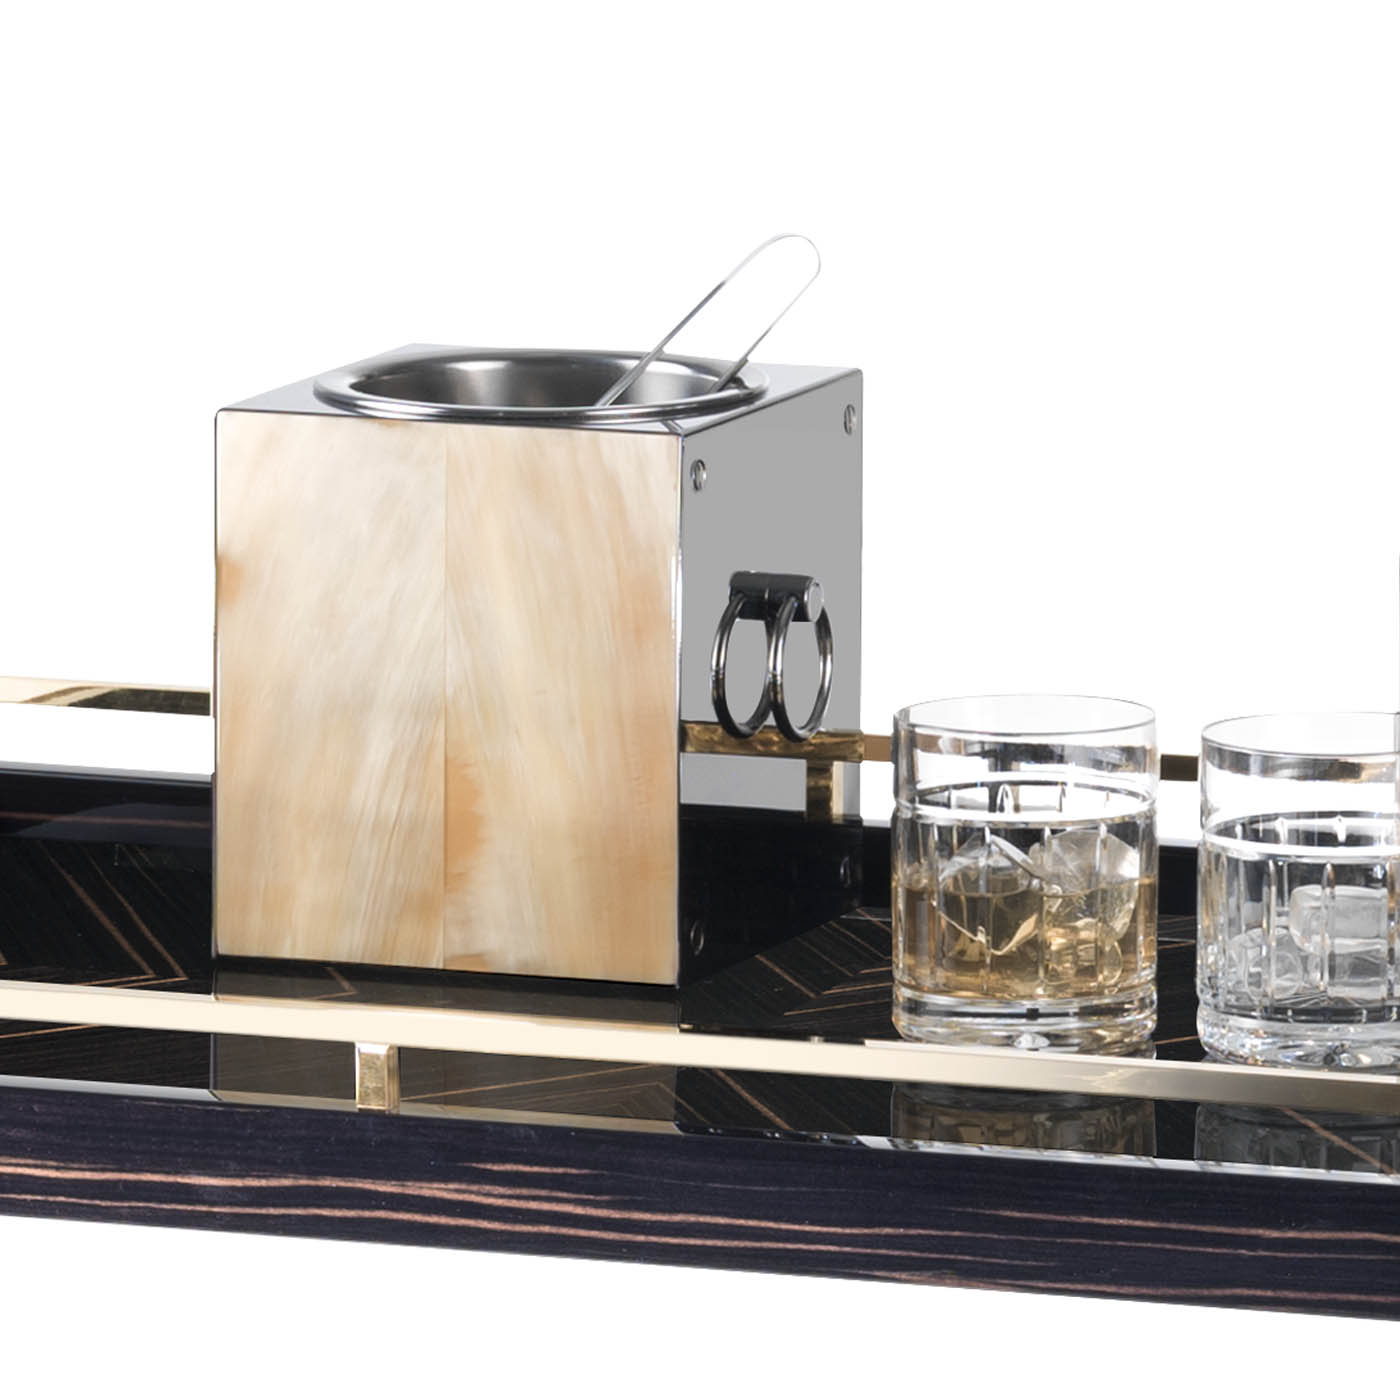 Tableware - Polar ice bucket in horn and stainless steel - ambiance picture - Arcahorn